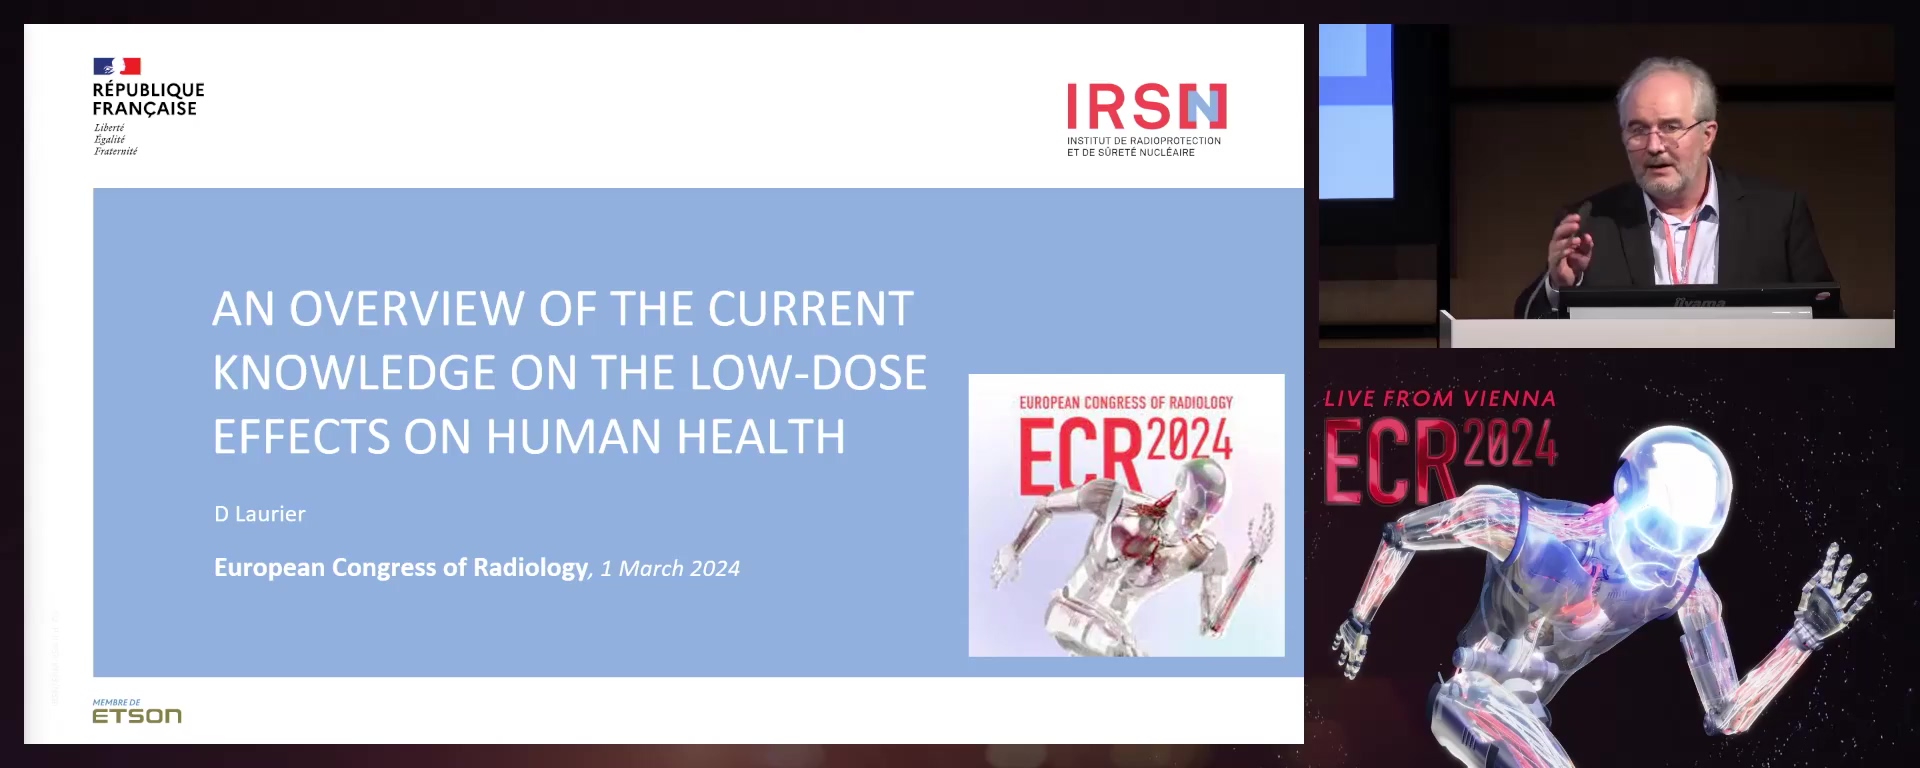 An overview of the current knowledge on the low-dose effects on human health